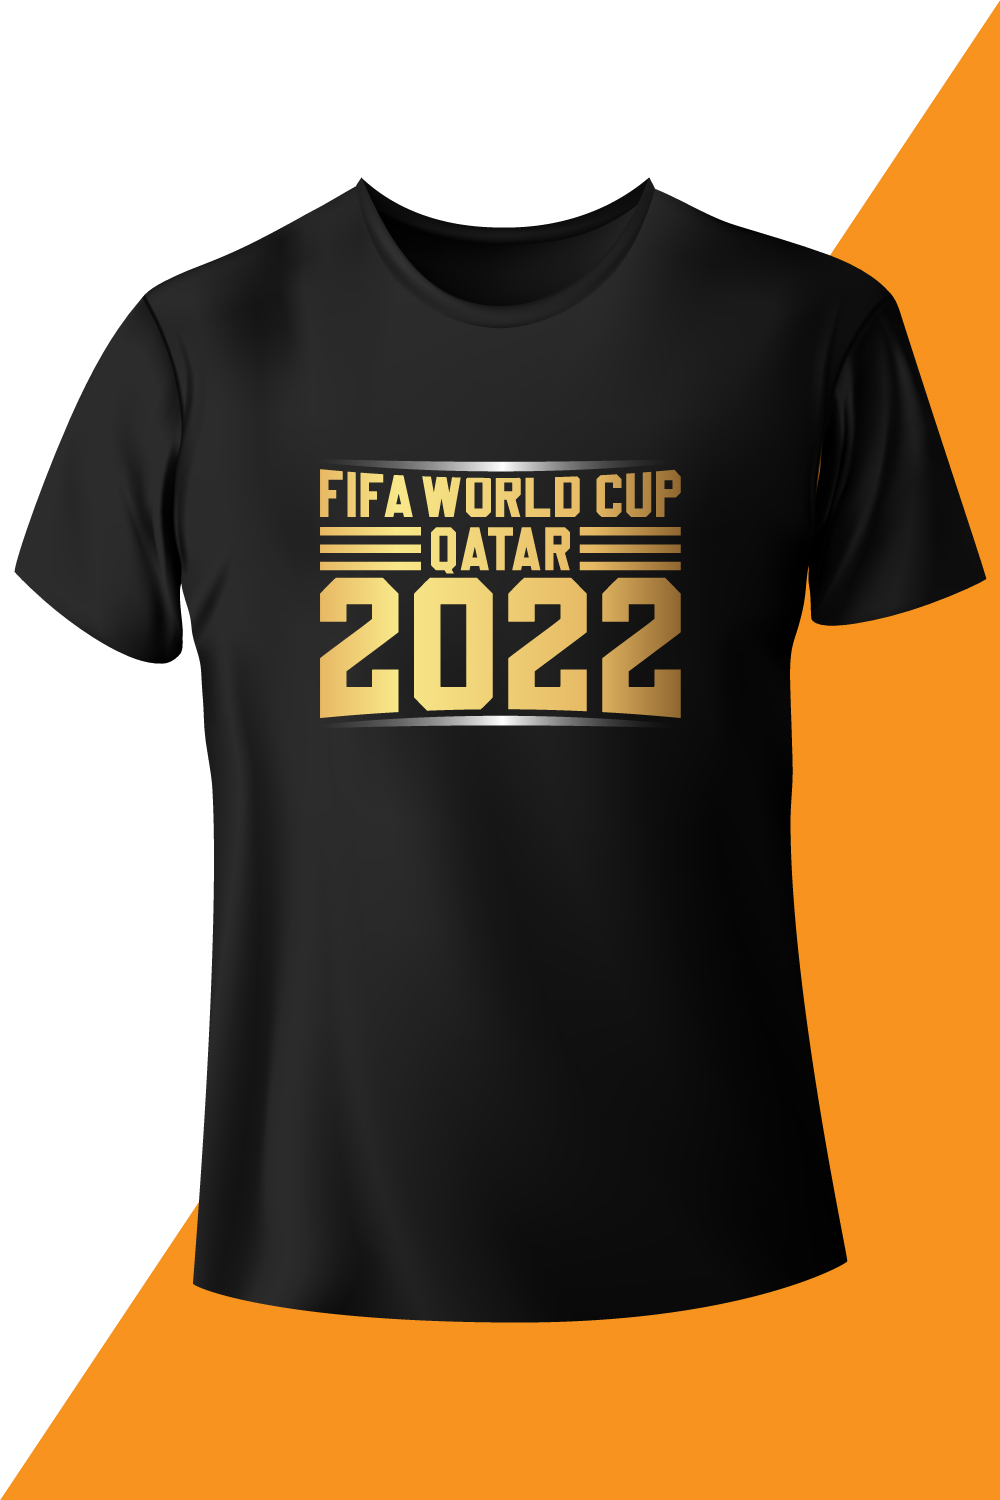 The image of a black t-shirt with a beautiful inscription fifa world cup qatar 2022.